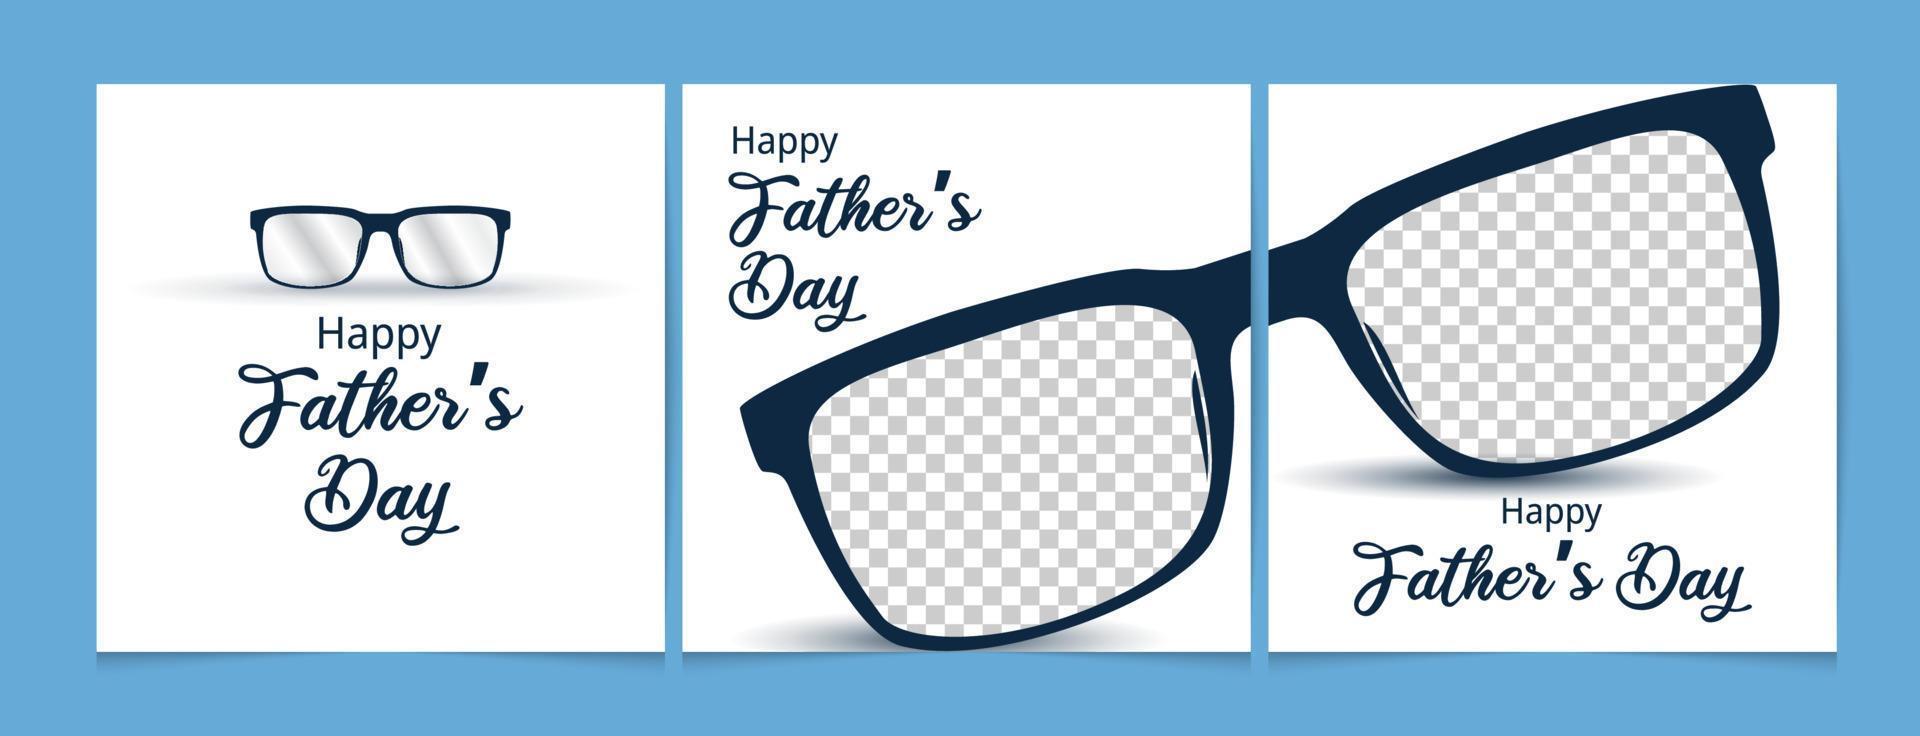 The design of the happy Father's Day social media template is simple vector